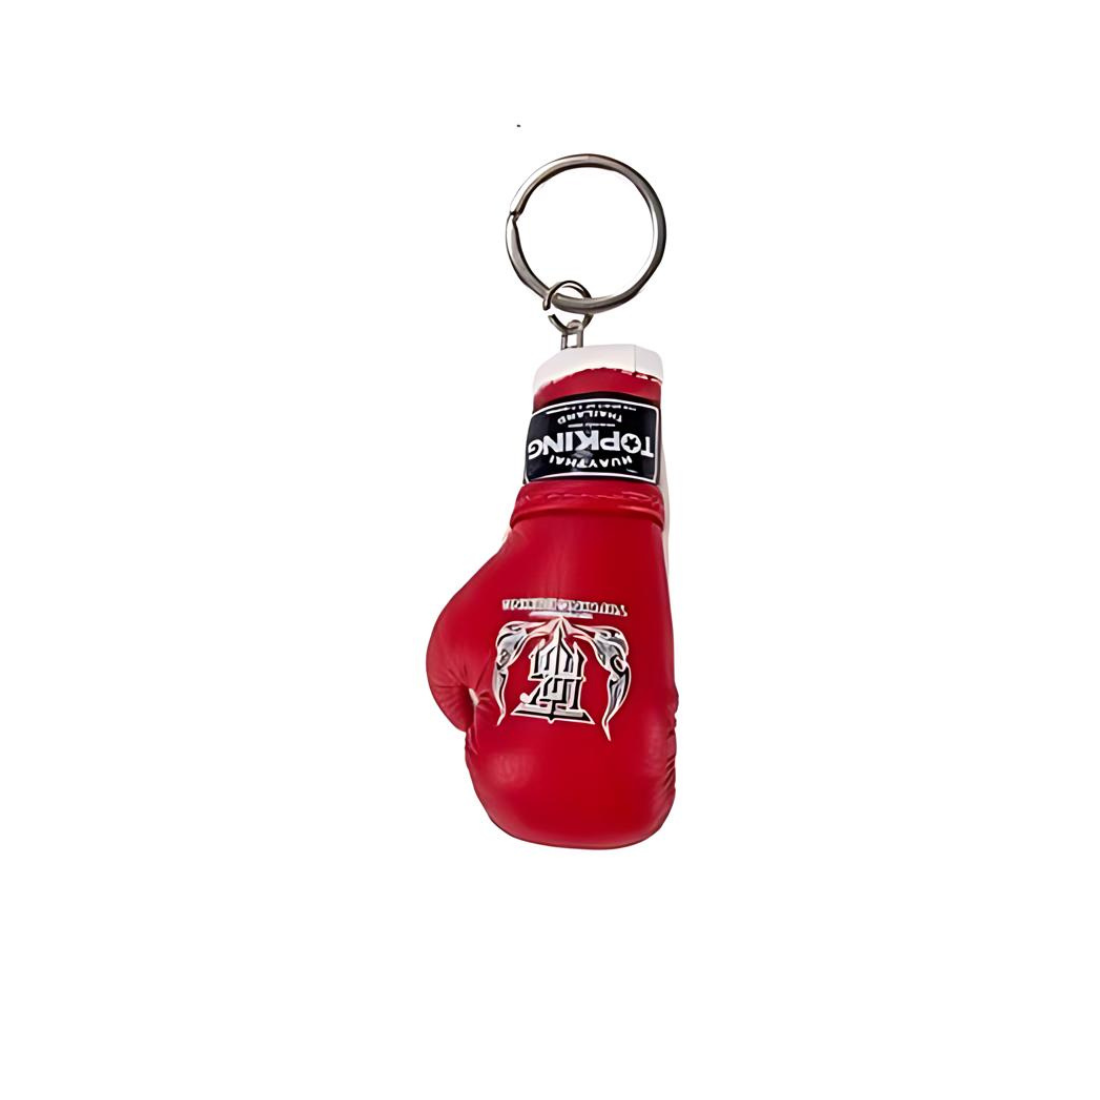 Boxing Glove Keyring in Red